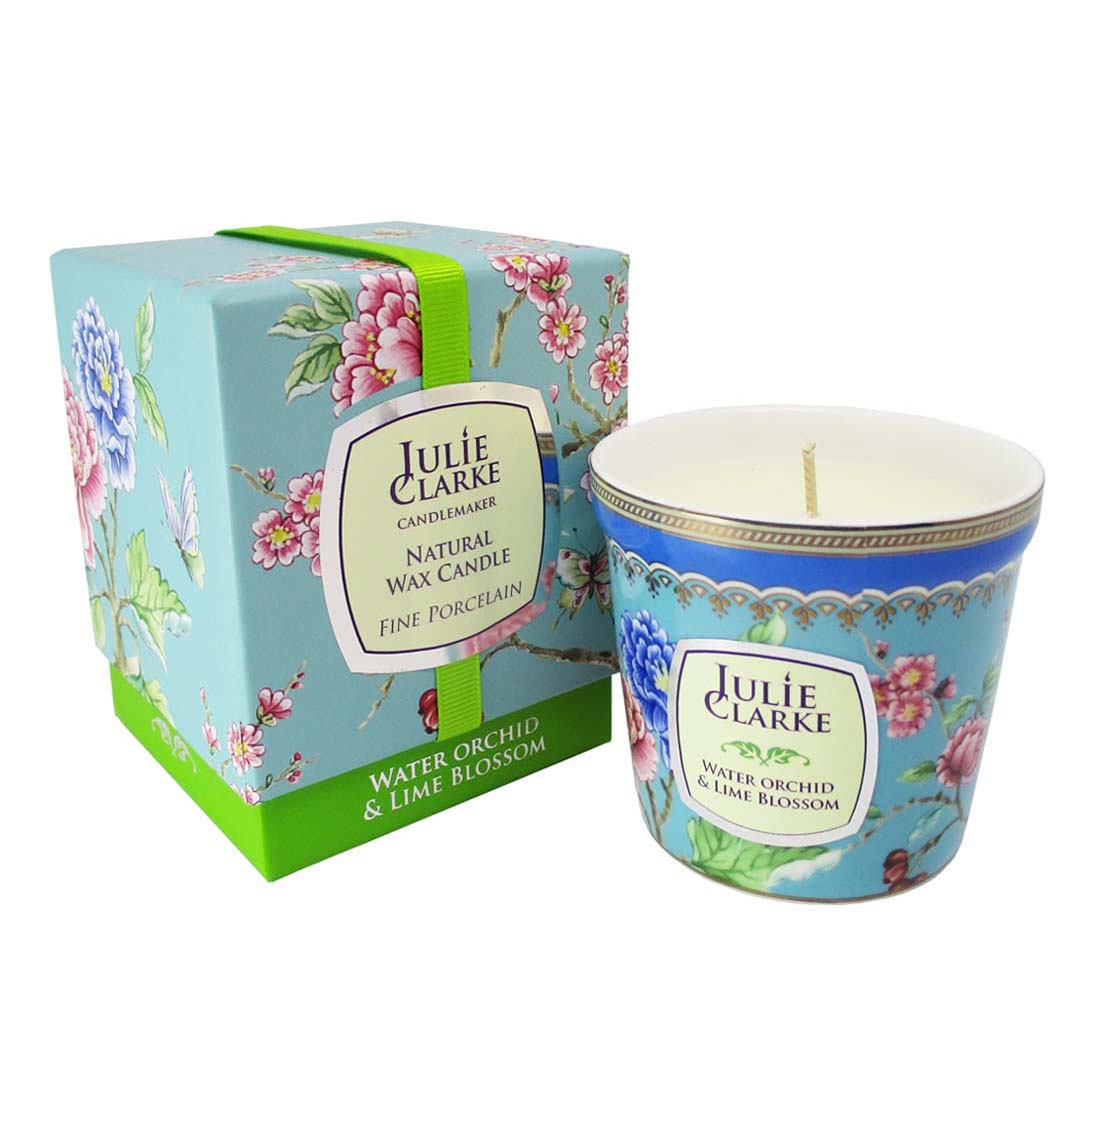 Water Orchid & Lime Blossom Botanic Candle, By Julie Clarke